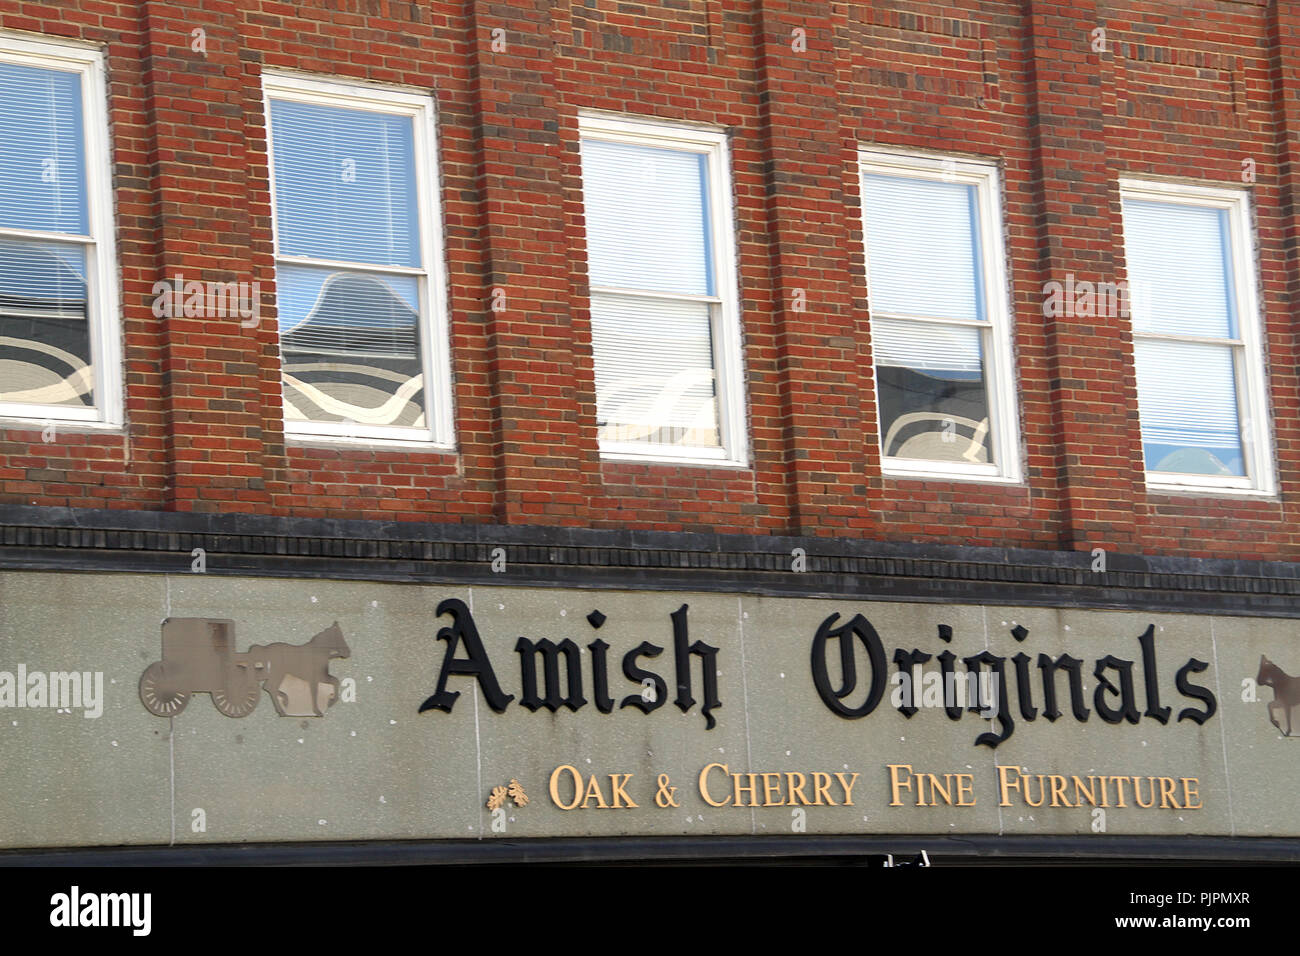 amish furniture store in downtown farmville, virginia stock